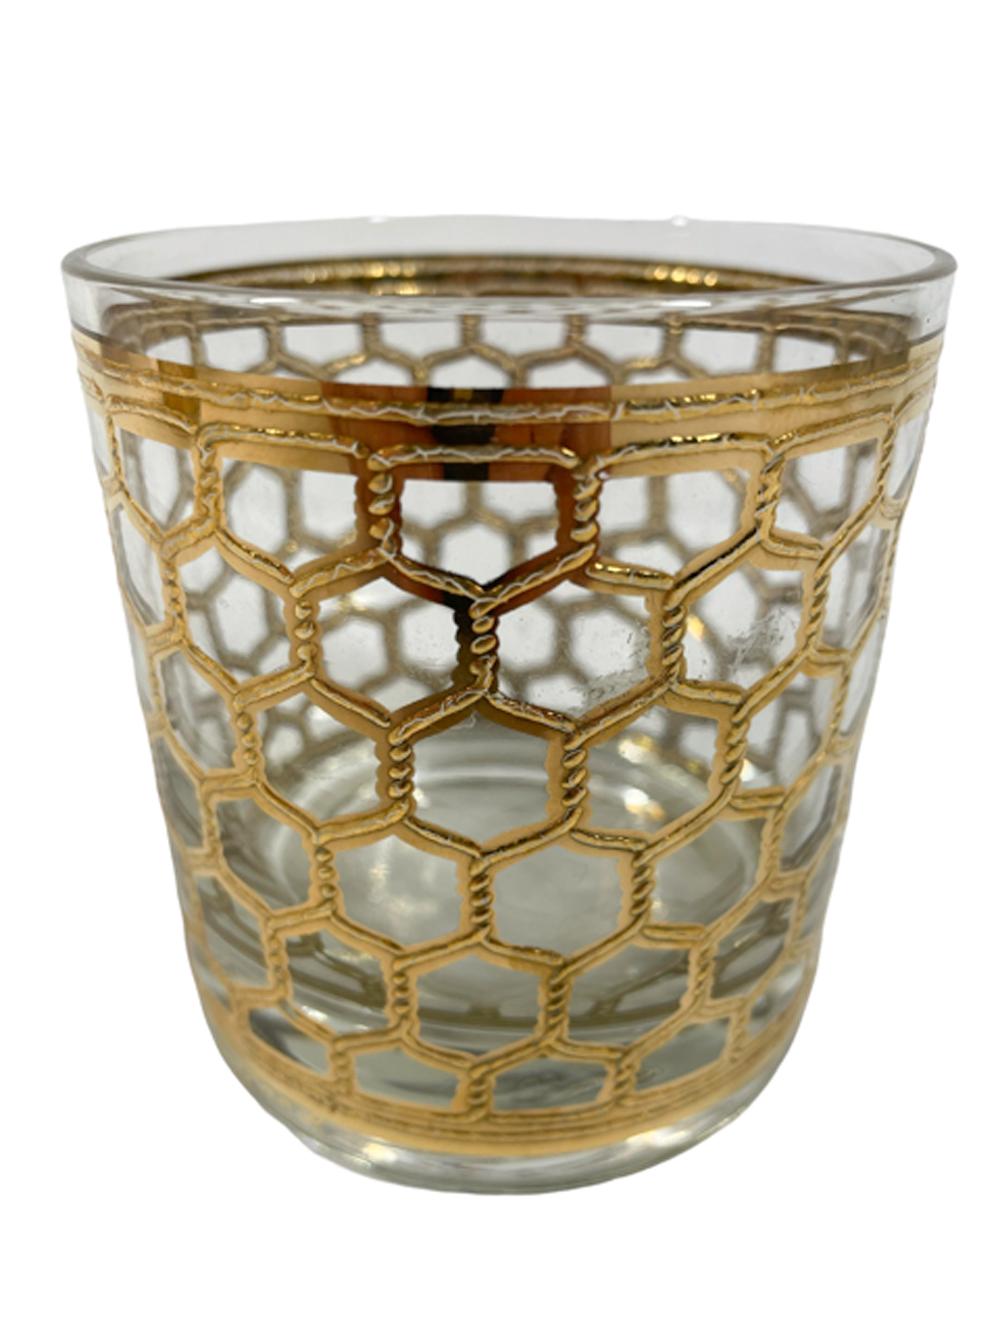 Georges Briard rocks glasses decorated in a raised hexagonal wire screen pattern executed in 22 karat gold.